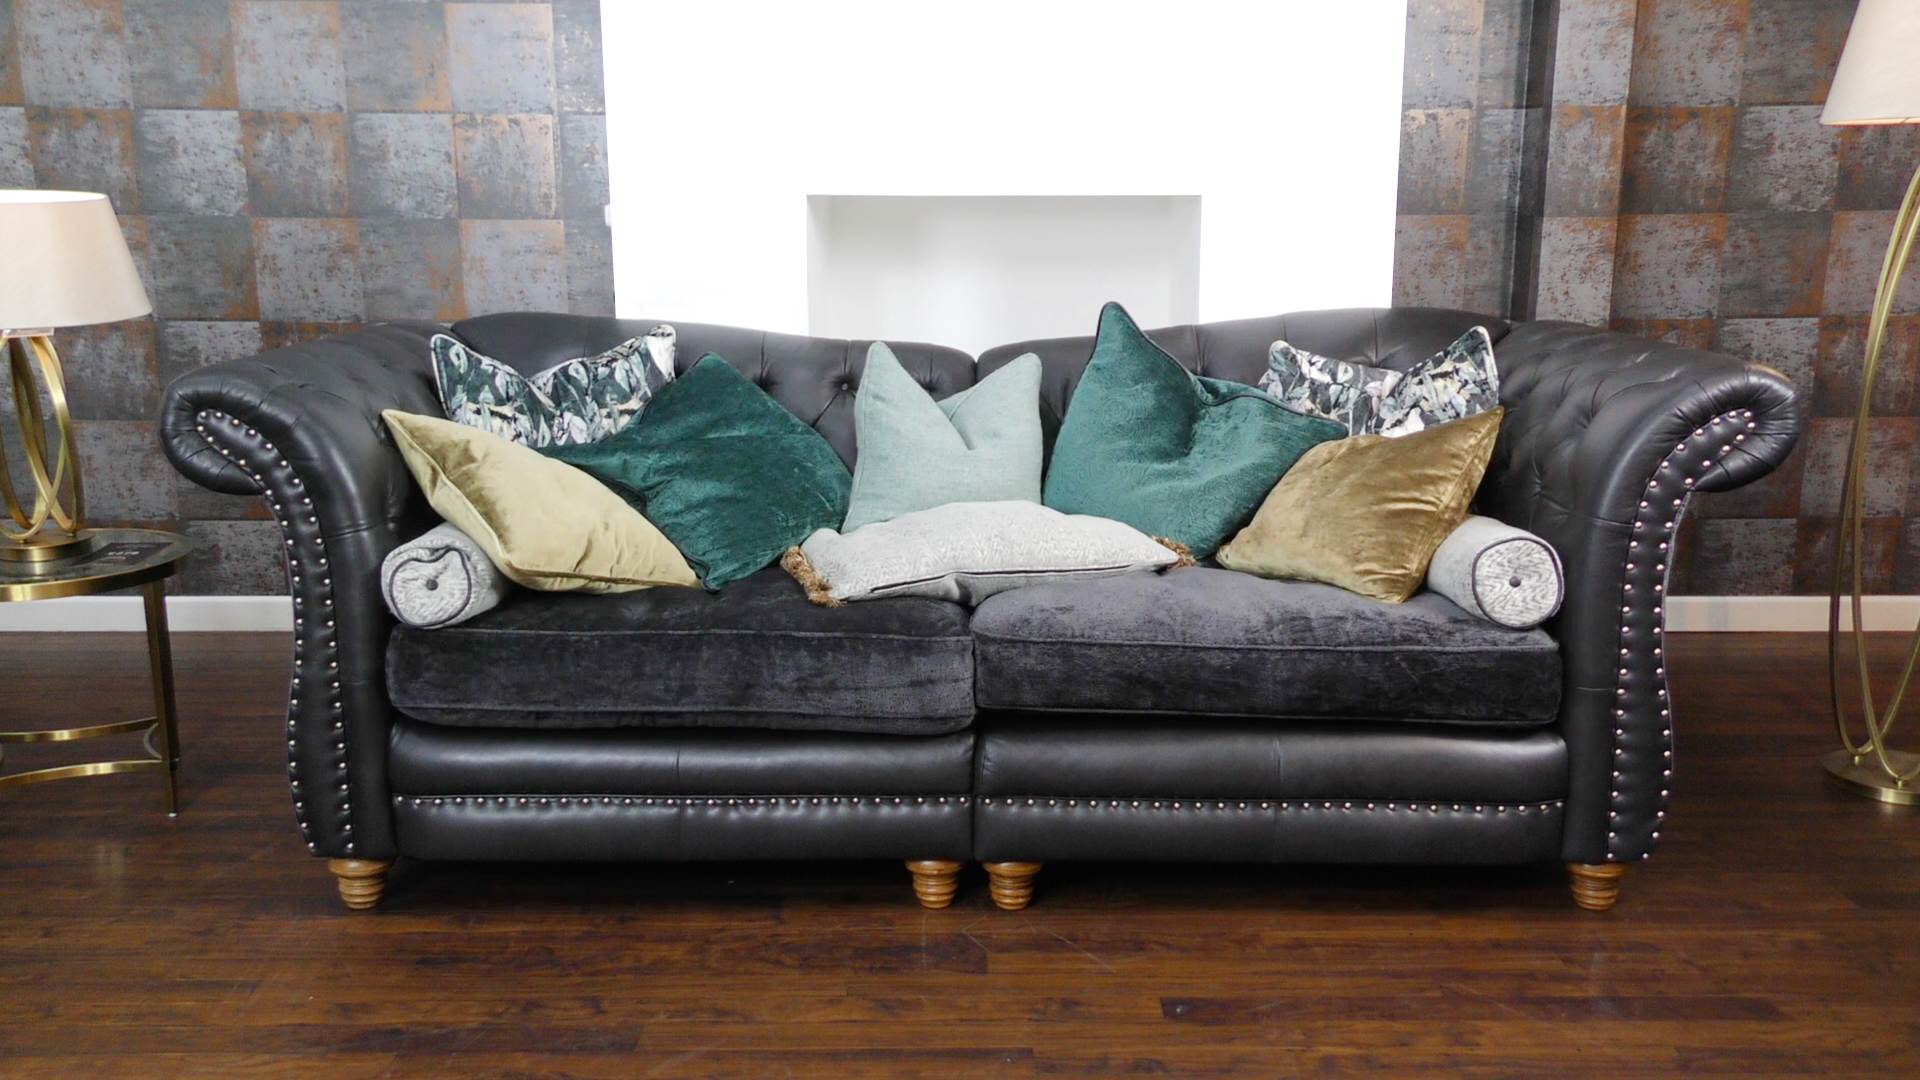 A quick and easy hack to plump up your sofa cushions. (+Leather